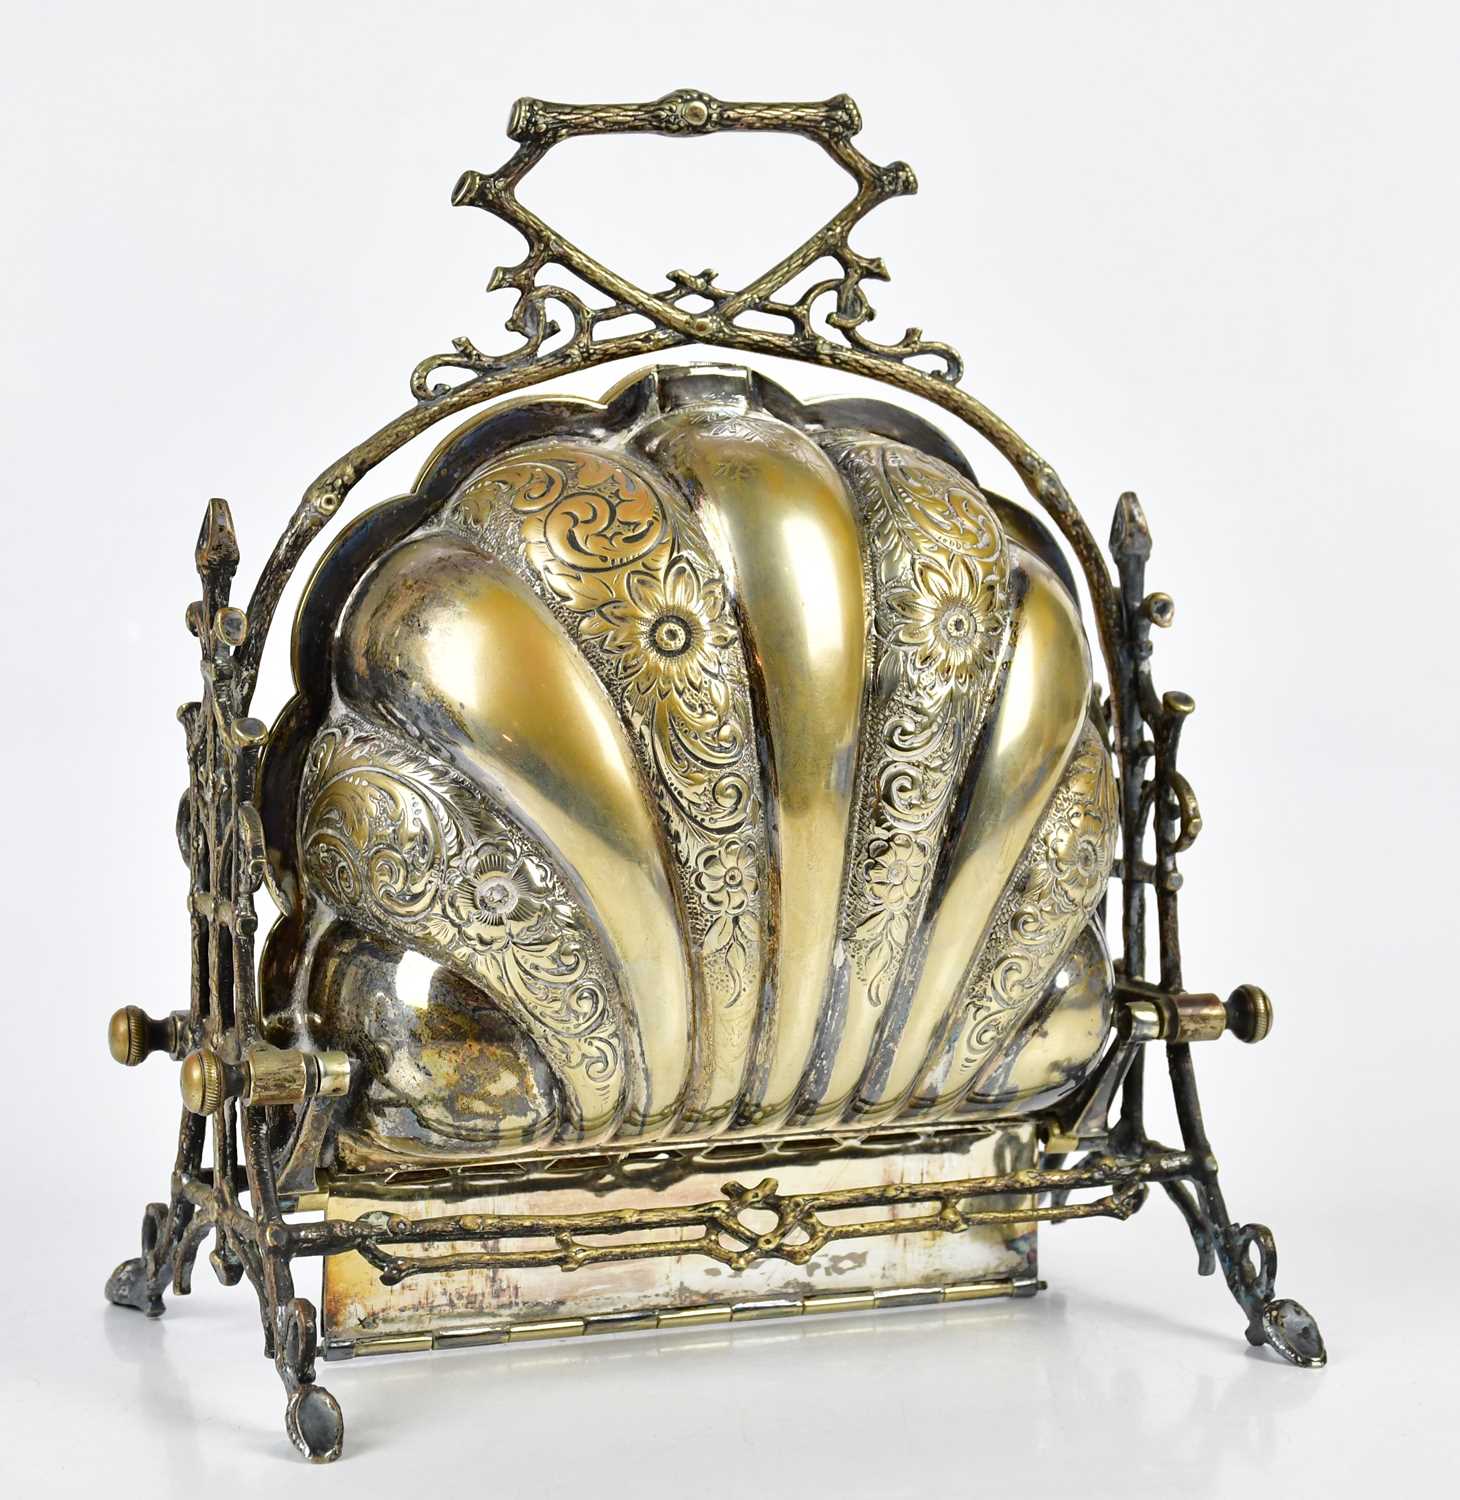 FENTON BROTHERS OF SHEFFIELD; a silver plated muffin warmer of shell form, height 25cm.